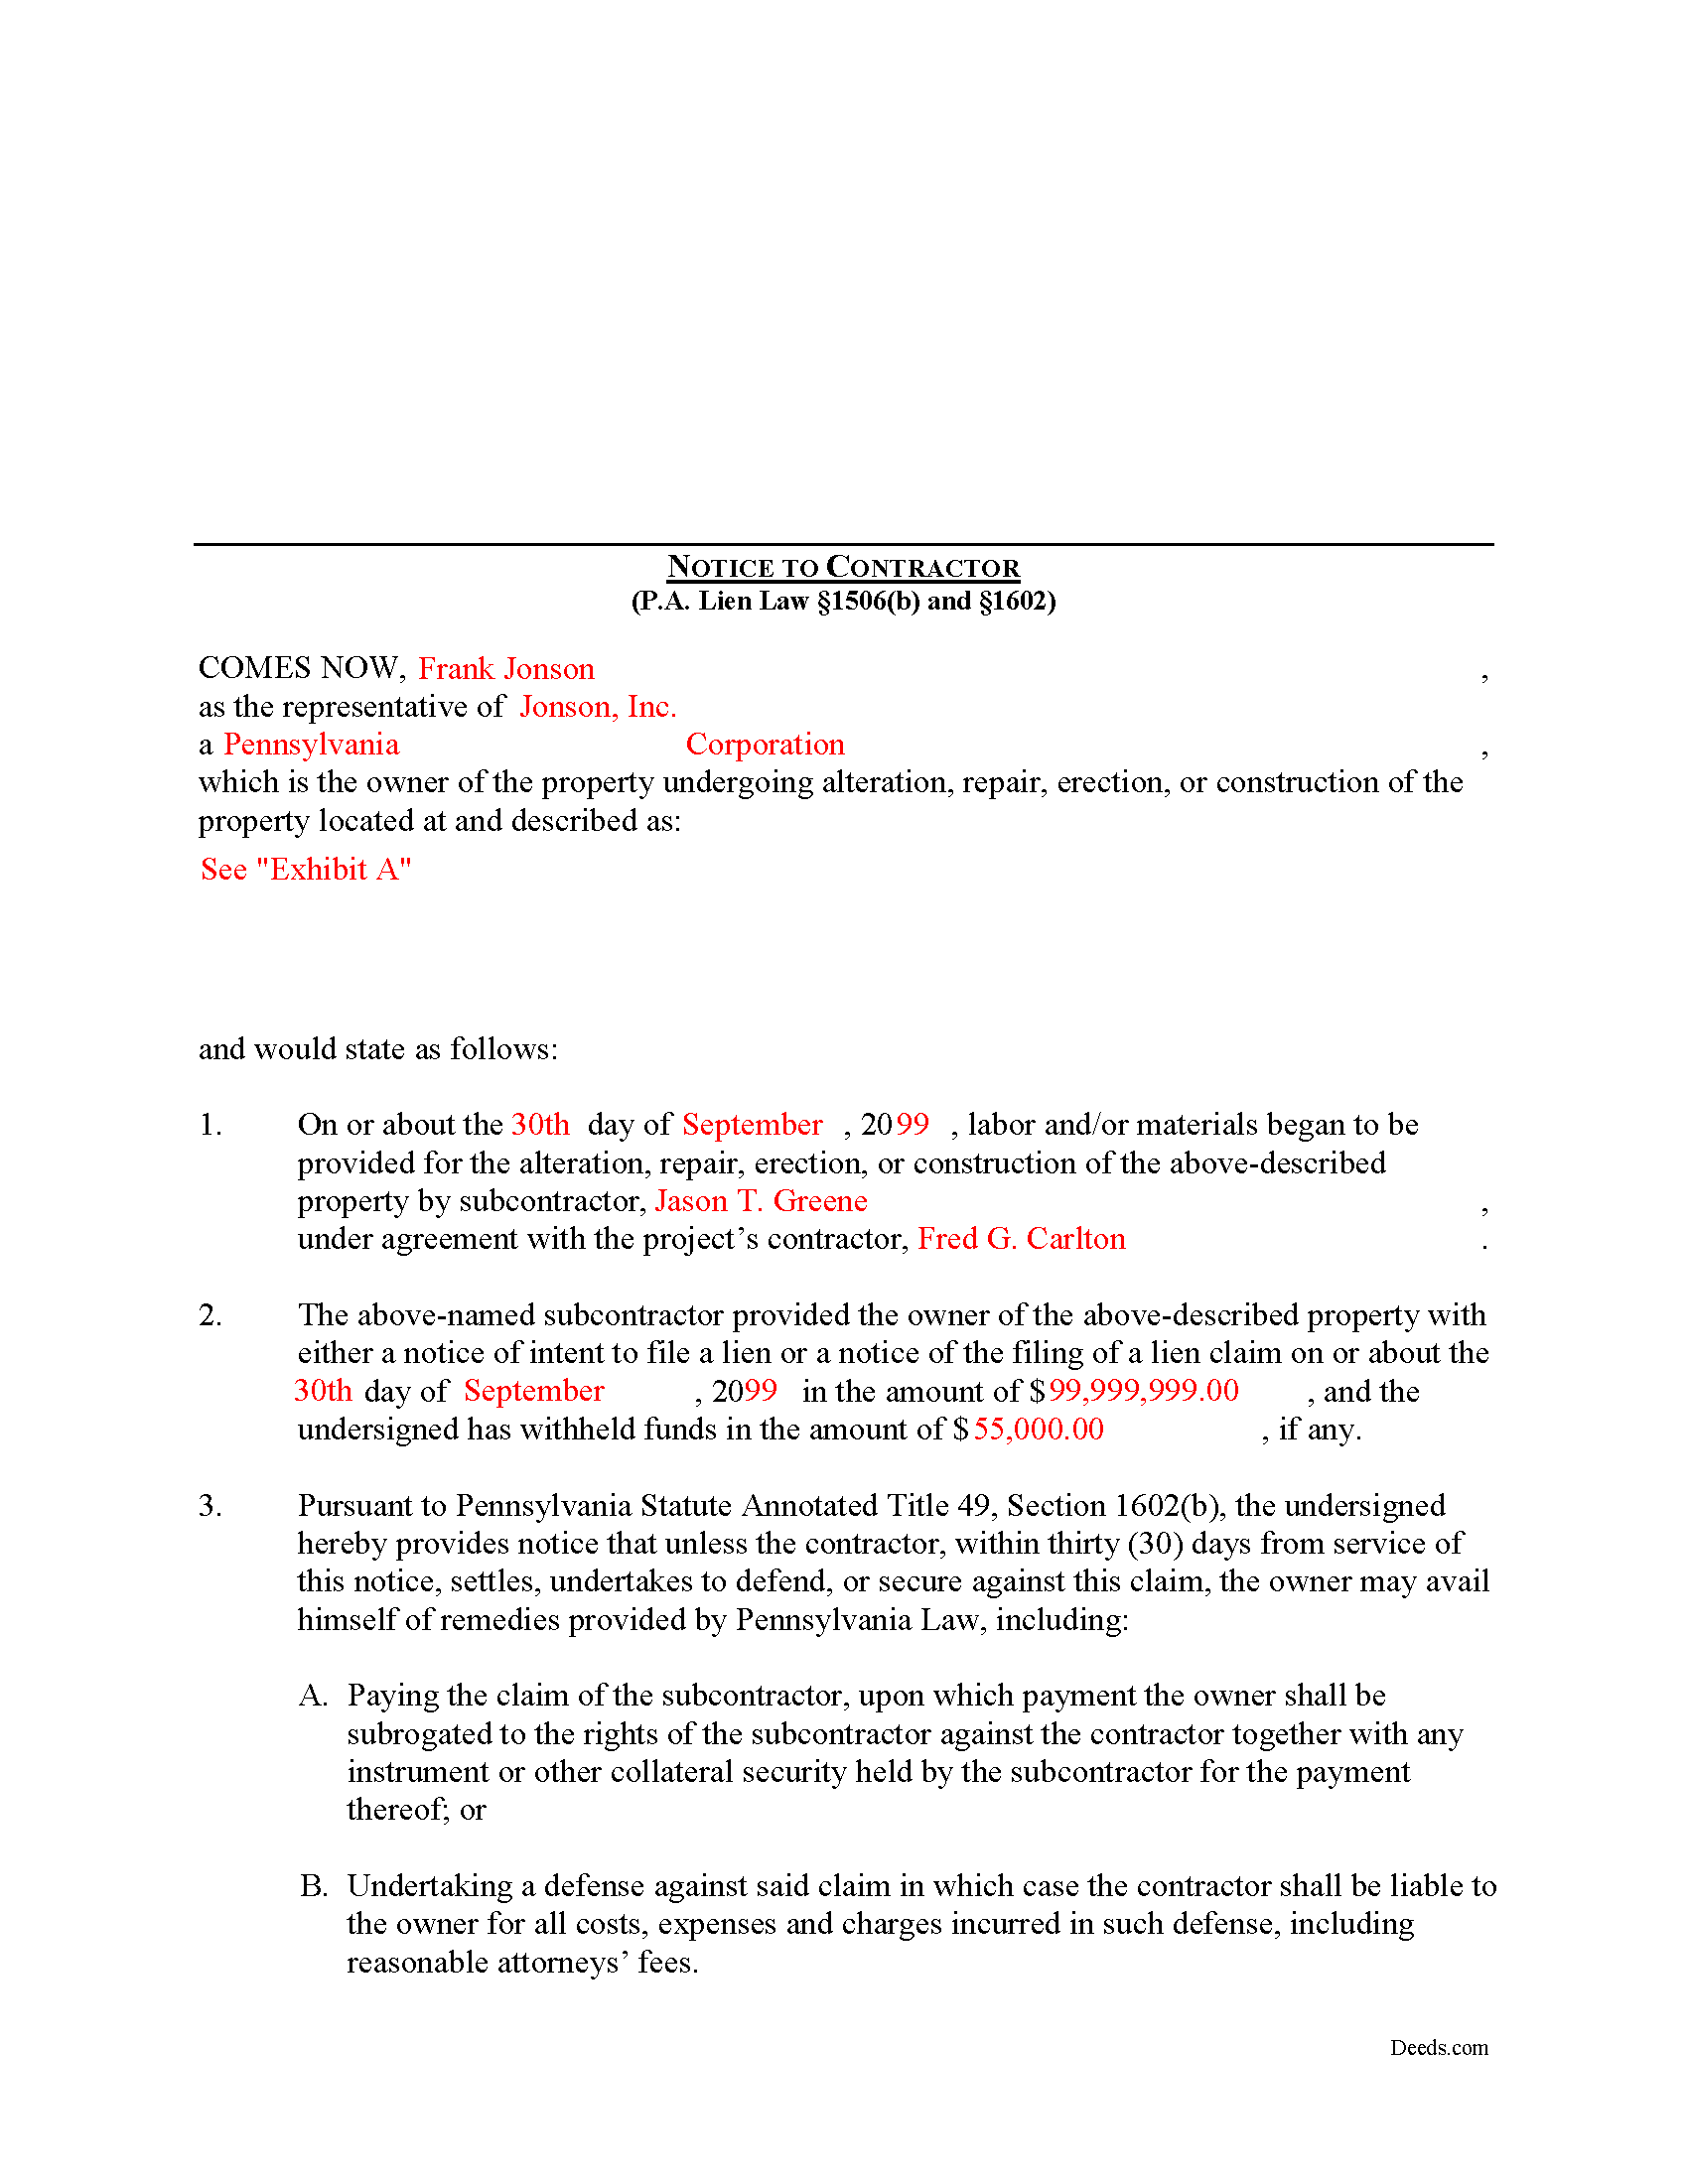 Completed Example of the Notice to Contractor Document